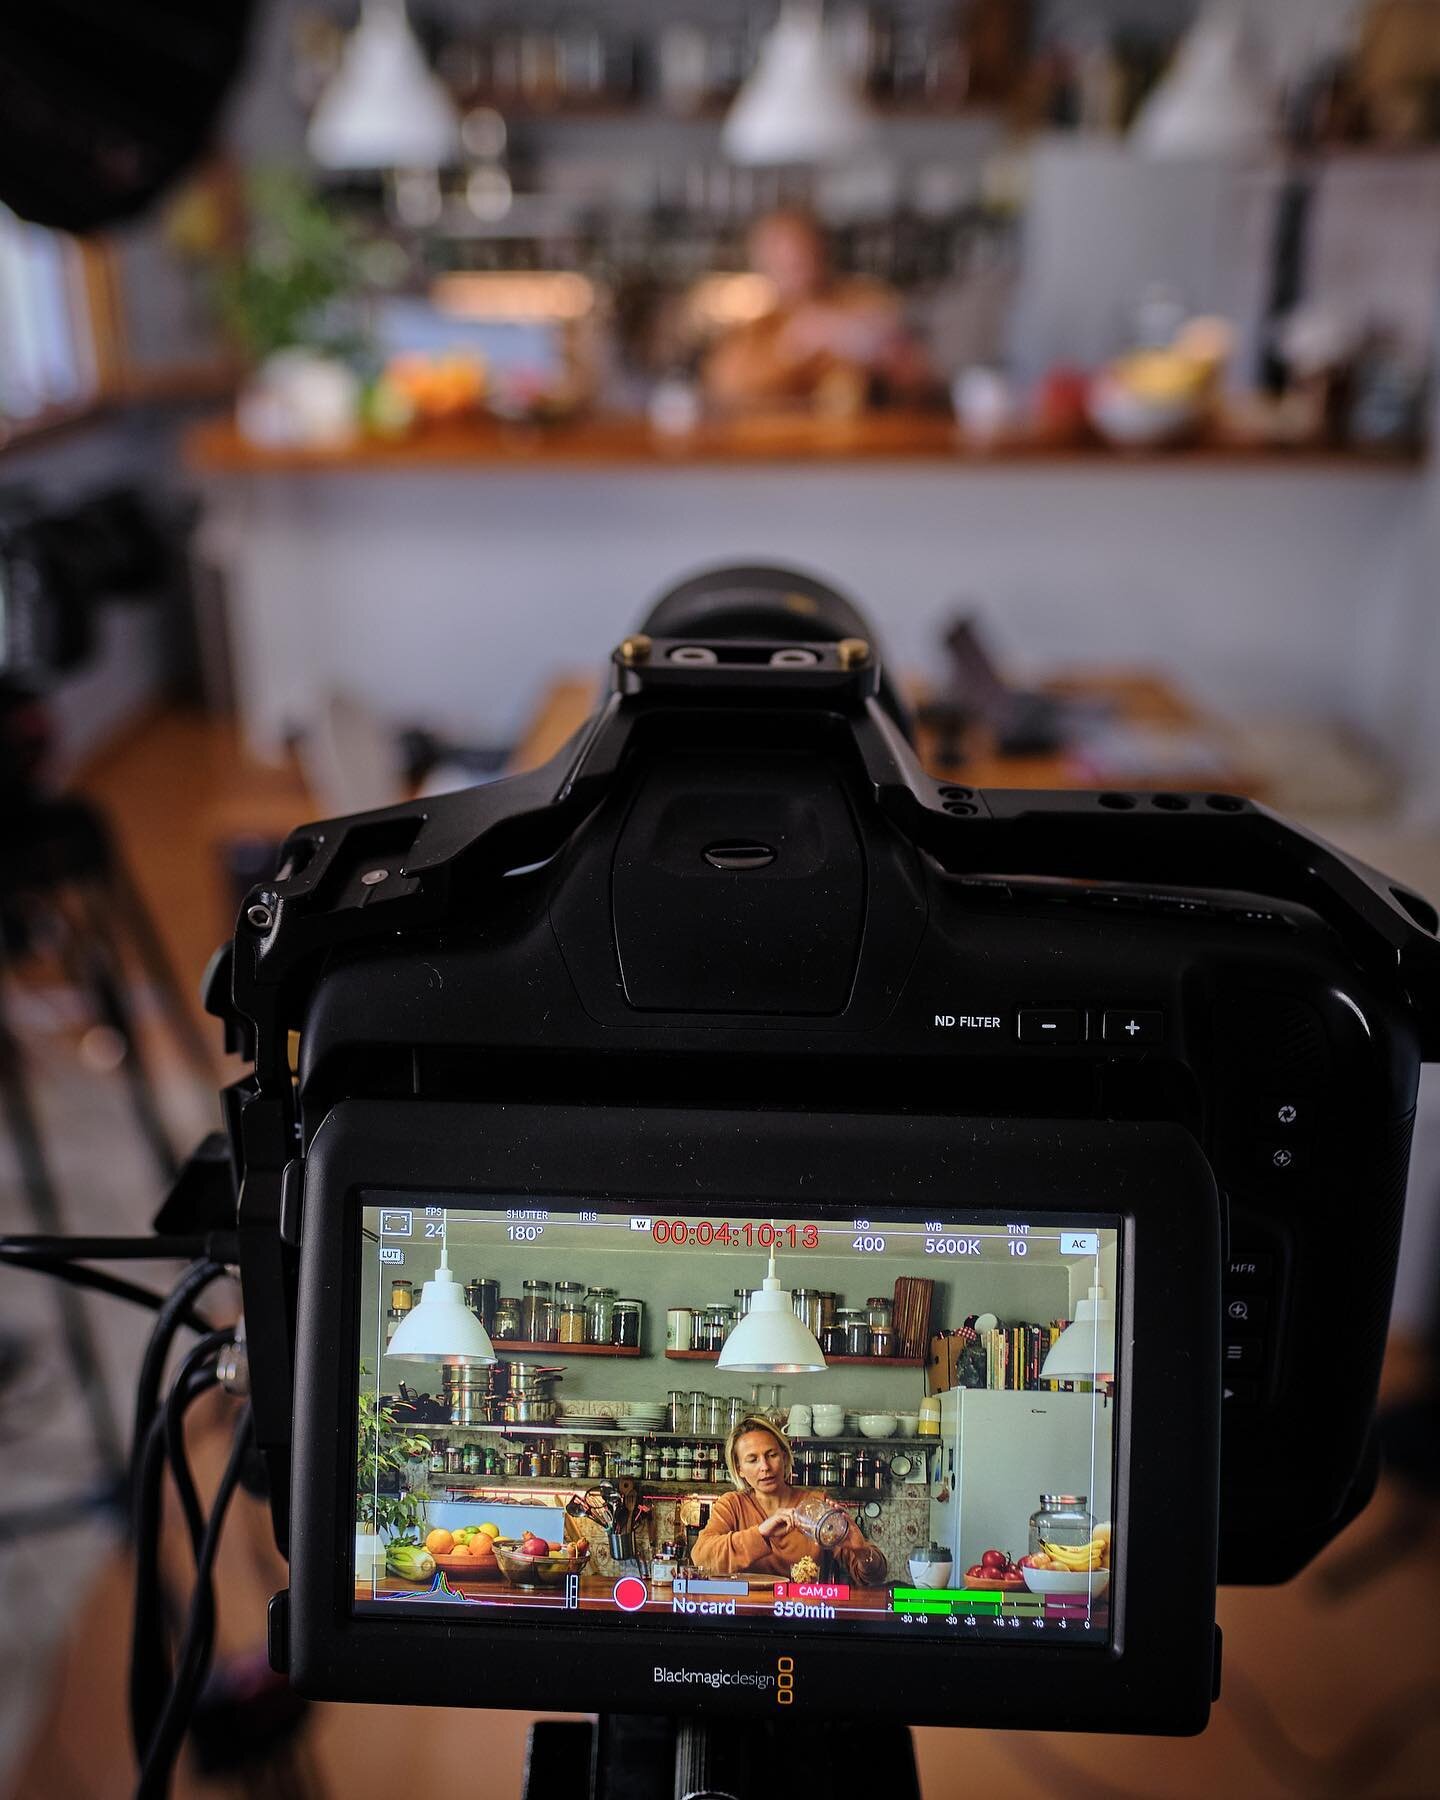 Shooting mode - Detox style. 
Yesterday we converted the kitchen into a studio and shot some videos for our spring detox program with @we.come.home.retreats 
If you are curious, you can also see me behind the counter sharing some of my detox secrets 